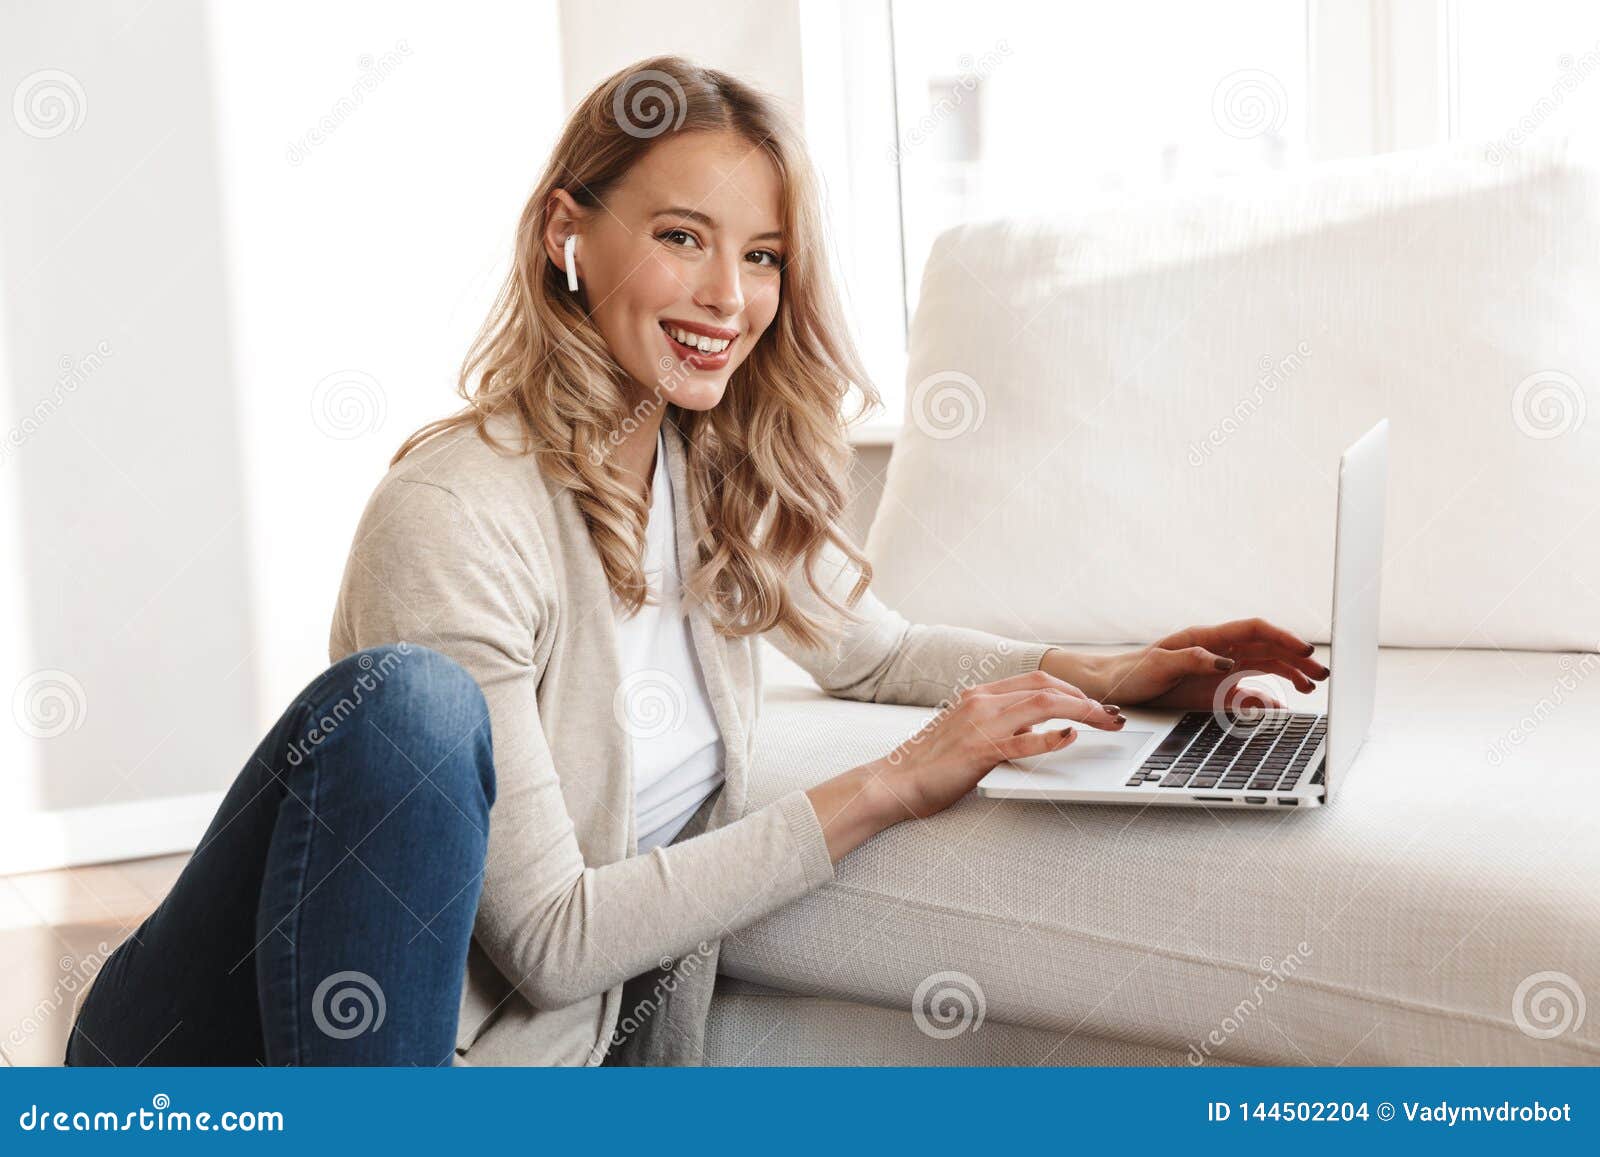 Woman sitting on sofa, using laptop computer, side view 